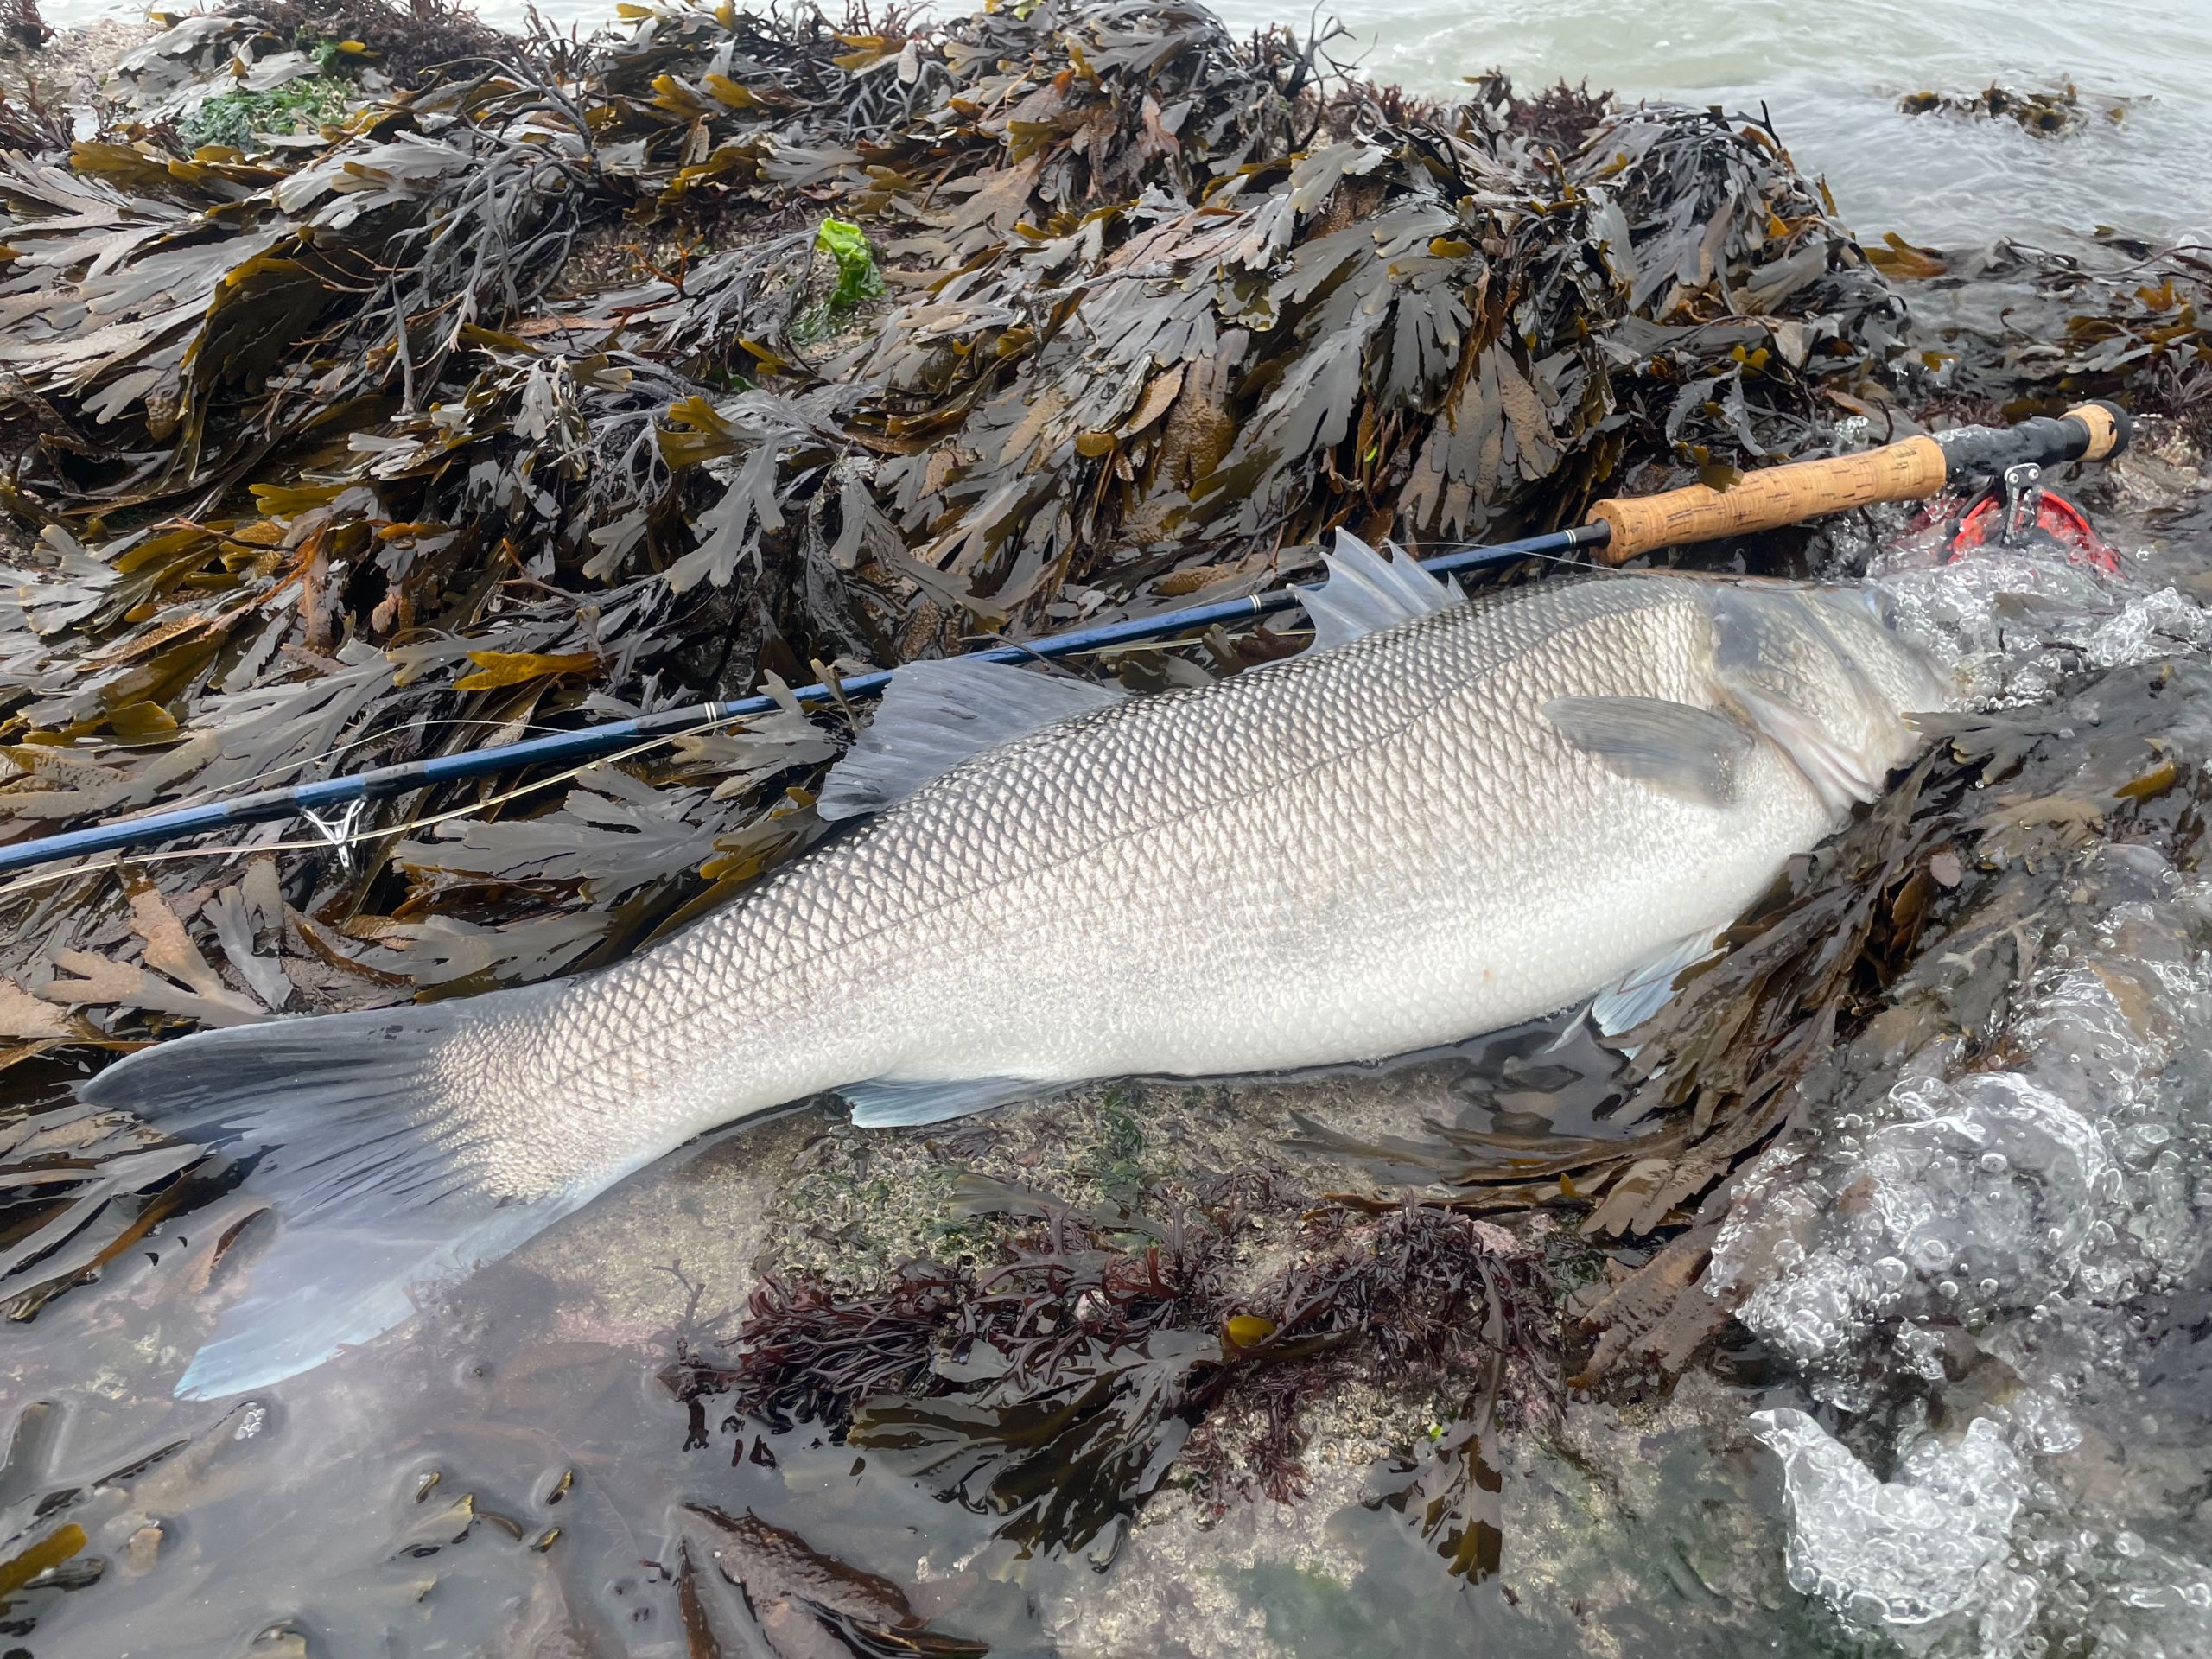 Mission "Sea Bass On The Fly" 2022 on the coasts of Ireland